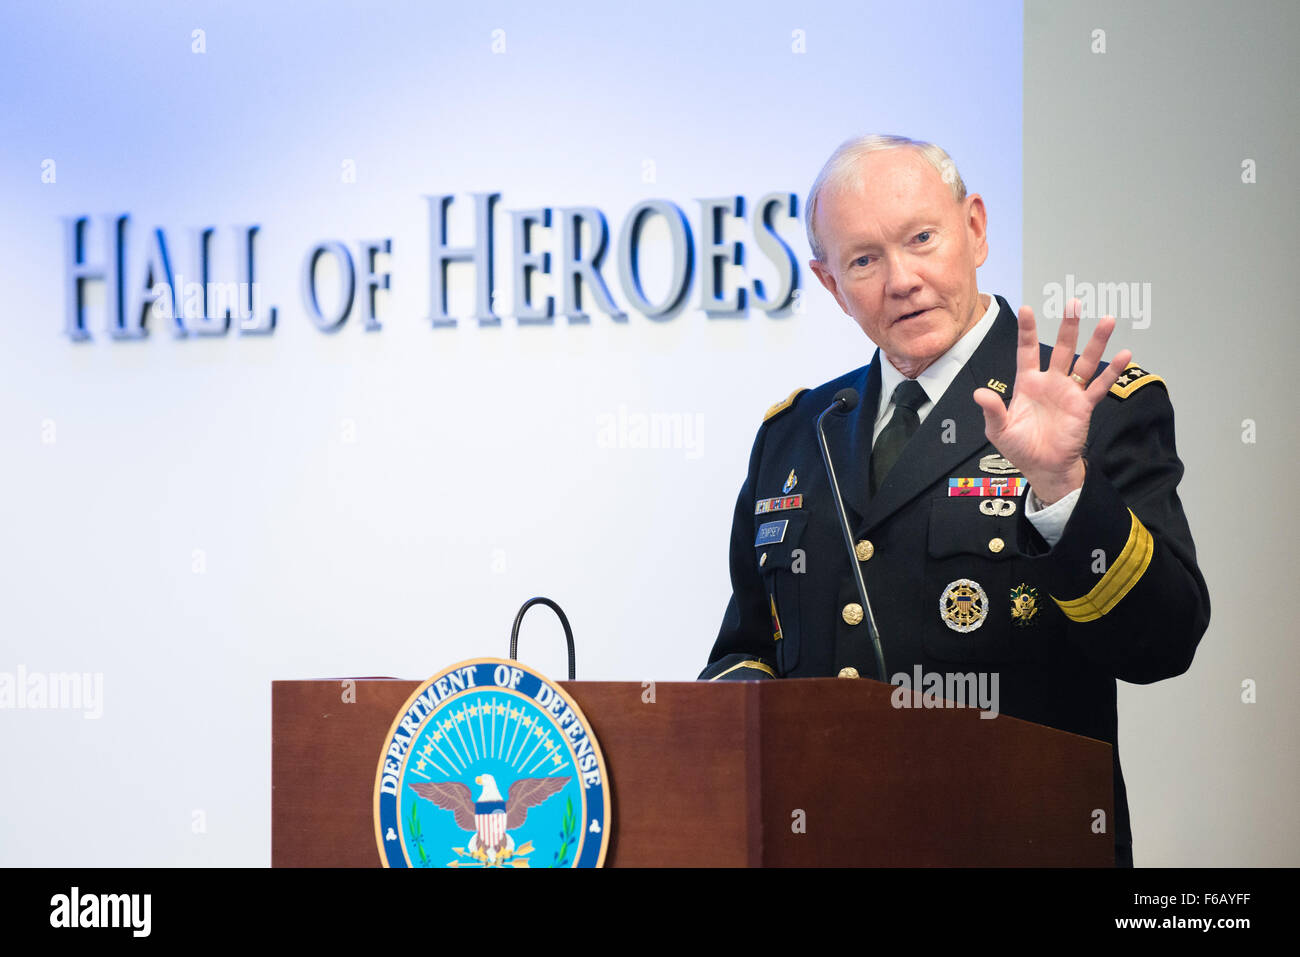 Eighteenth Chairman of the Joint Chiefs of Staff Gen. Martin E. Dempsey speaks during the 16th Annual Newman's Own Awards, hosted in the Pentagon's Hall of Heroes, Sept. 2, 2015. During the ceremony, awards totaling $200,000 were presented to six military nonprofit organizations for their innovative programs to improve military quality of life. (DoD photo by Army Staff Sgt. Sean K. Harp/Released) Stock Photo